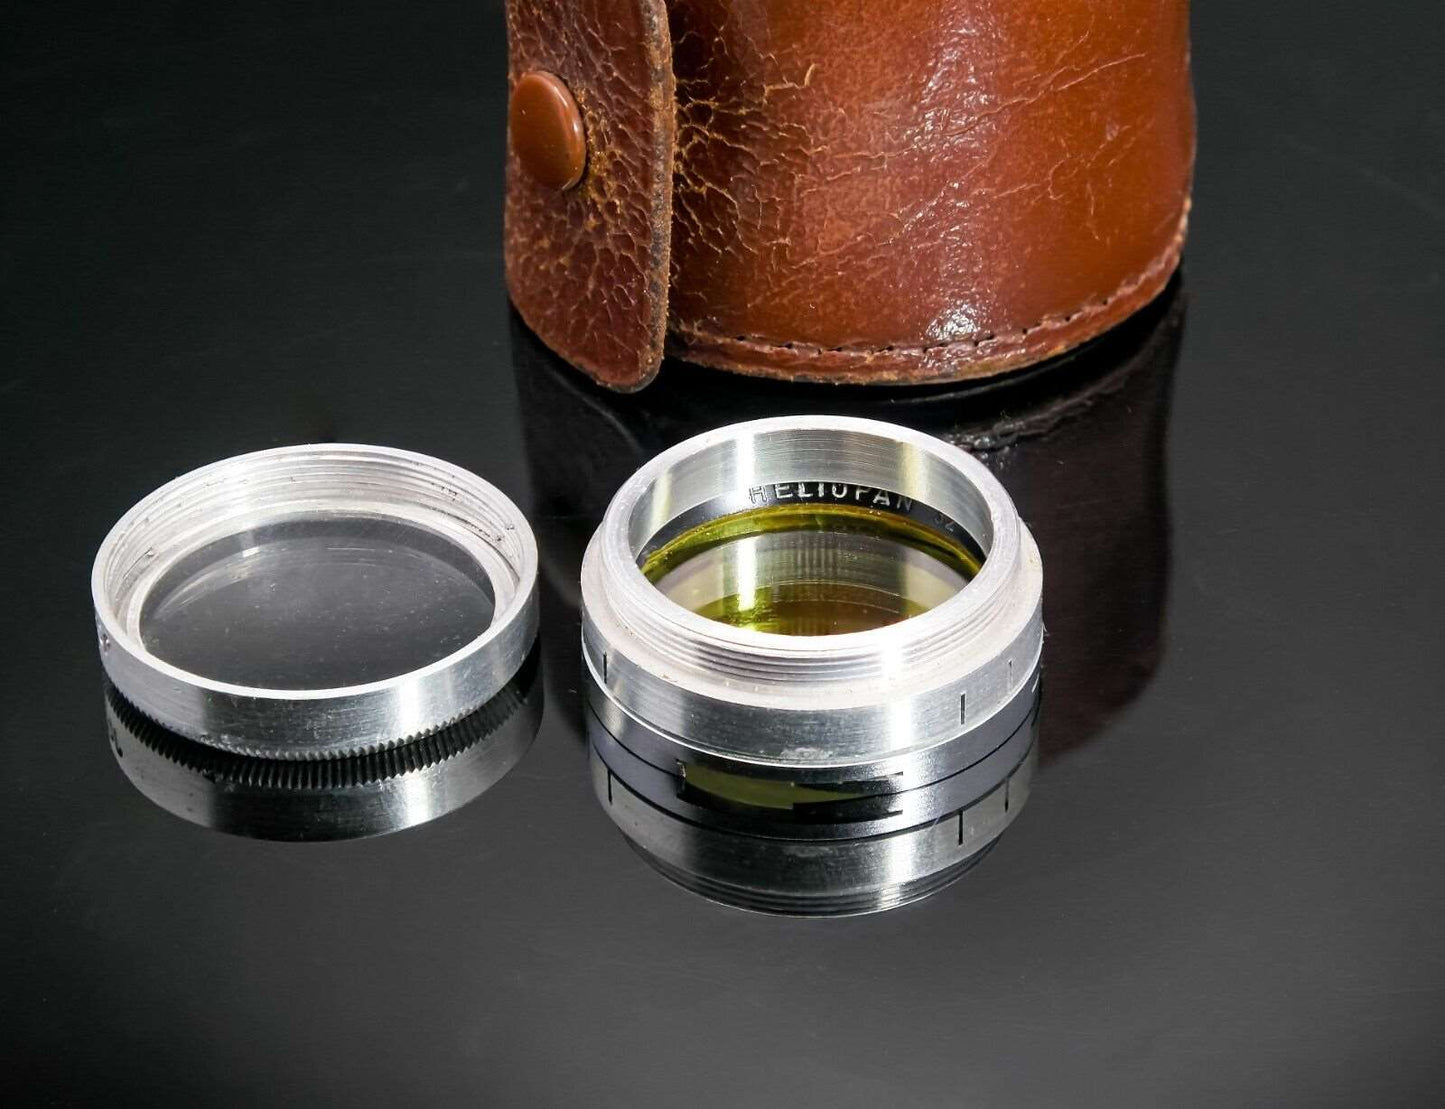 Johnson 32 Lens and Heliopan 32 Yellow Filter Lens in Leather Carry Case Vintage